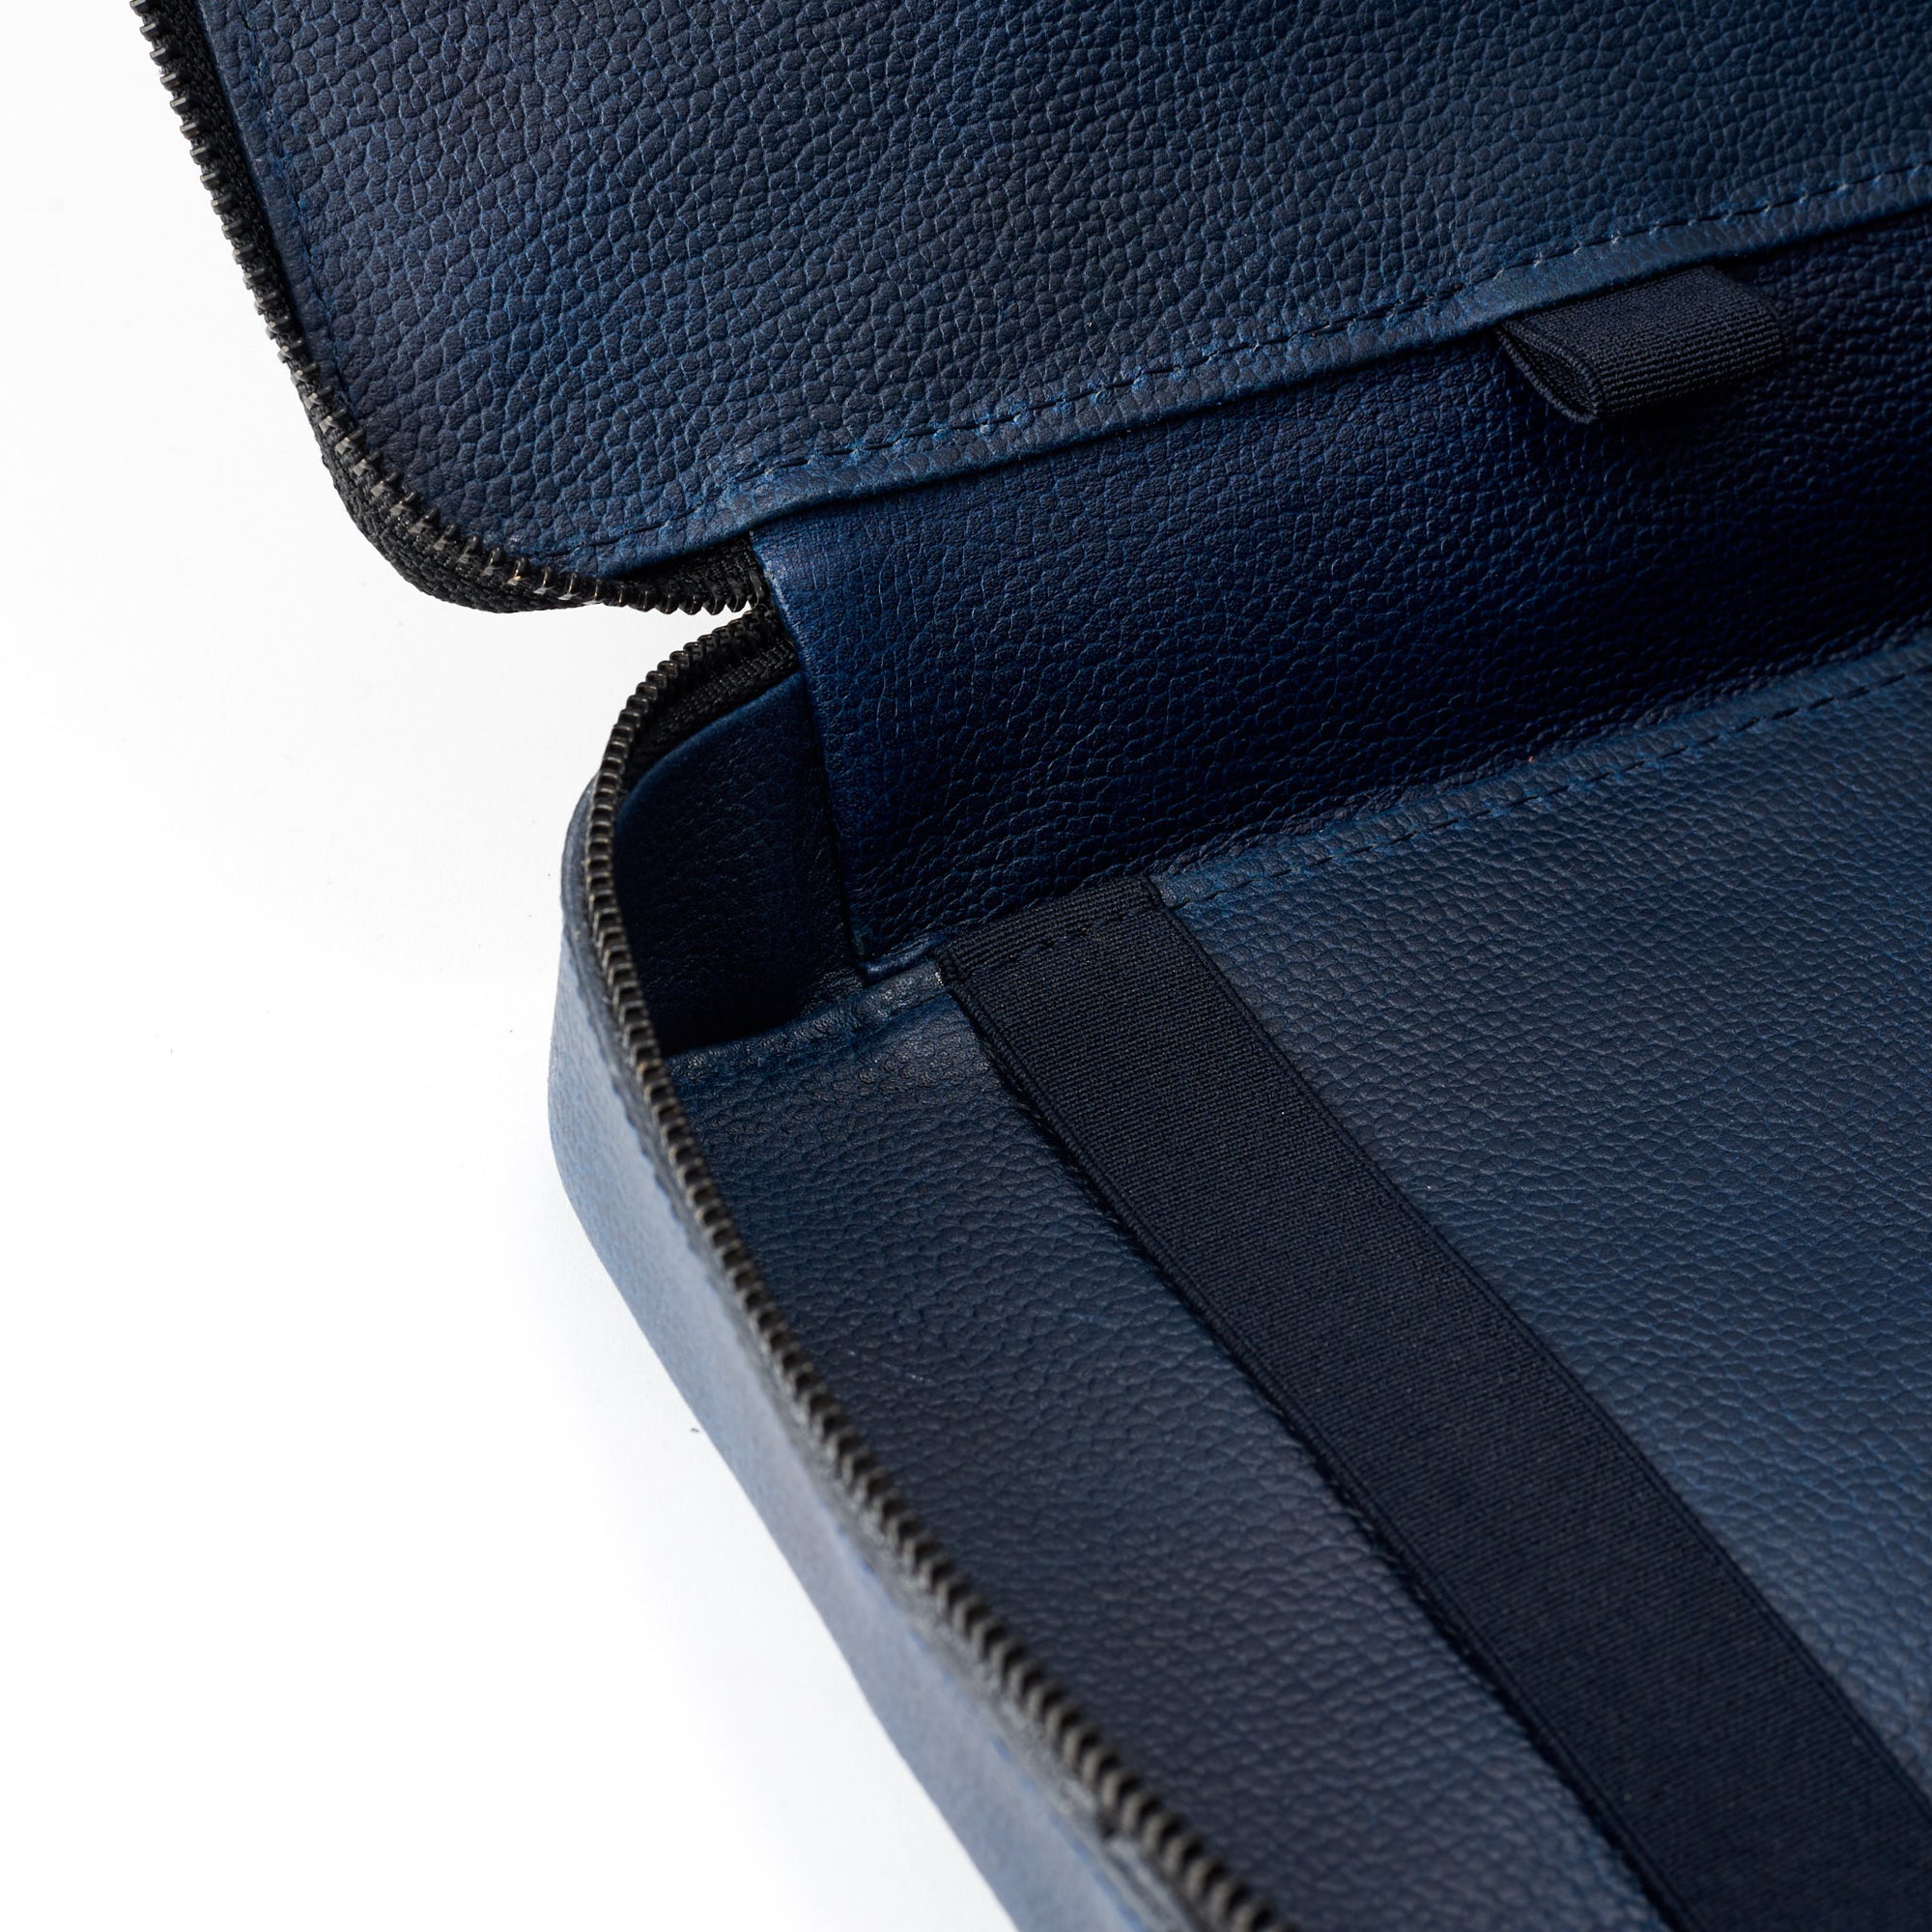 Leather Lining. Best tech travel bag navy blue by Capra Leather